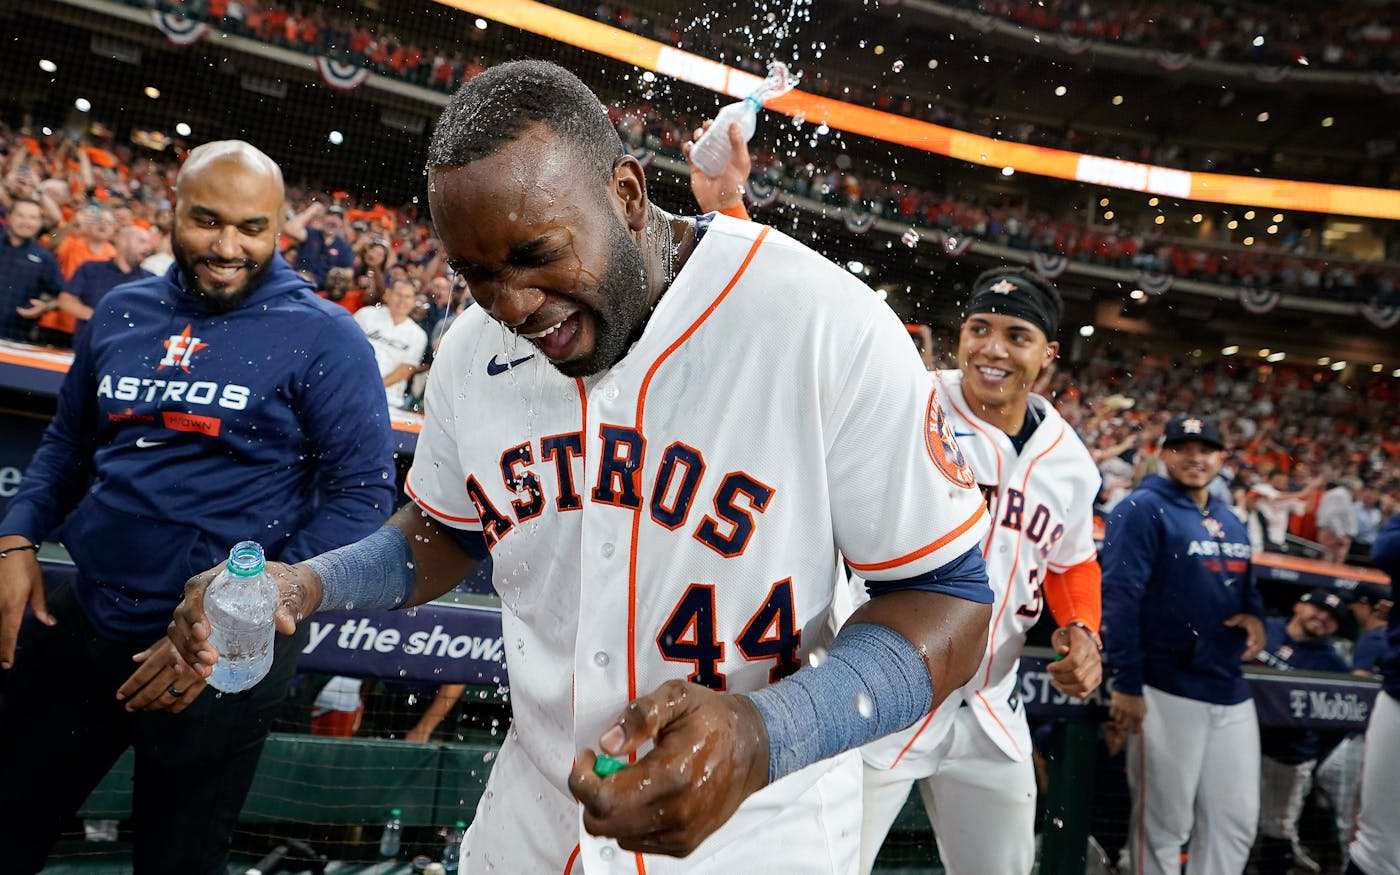 Astros, city cement their bond with a parade for the ages